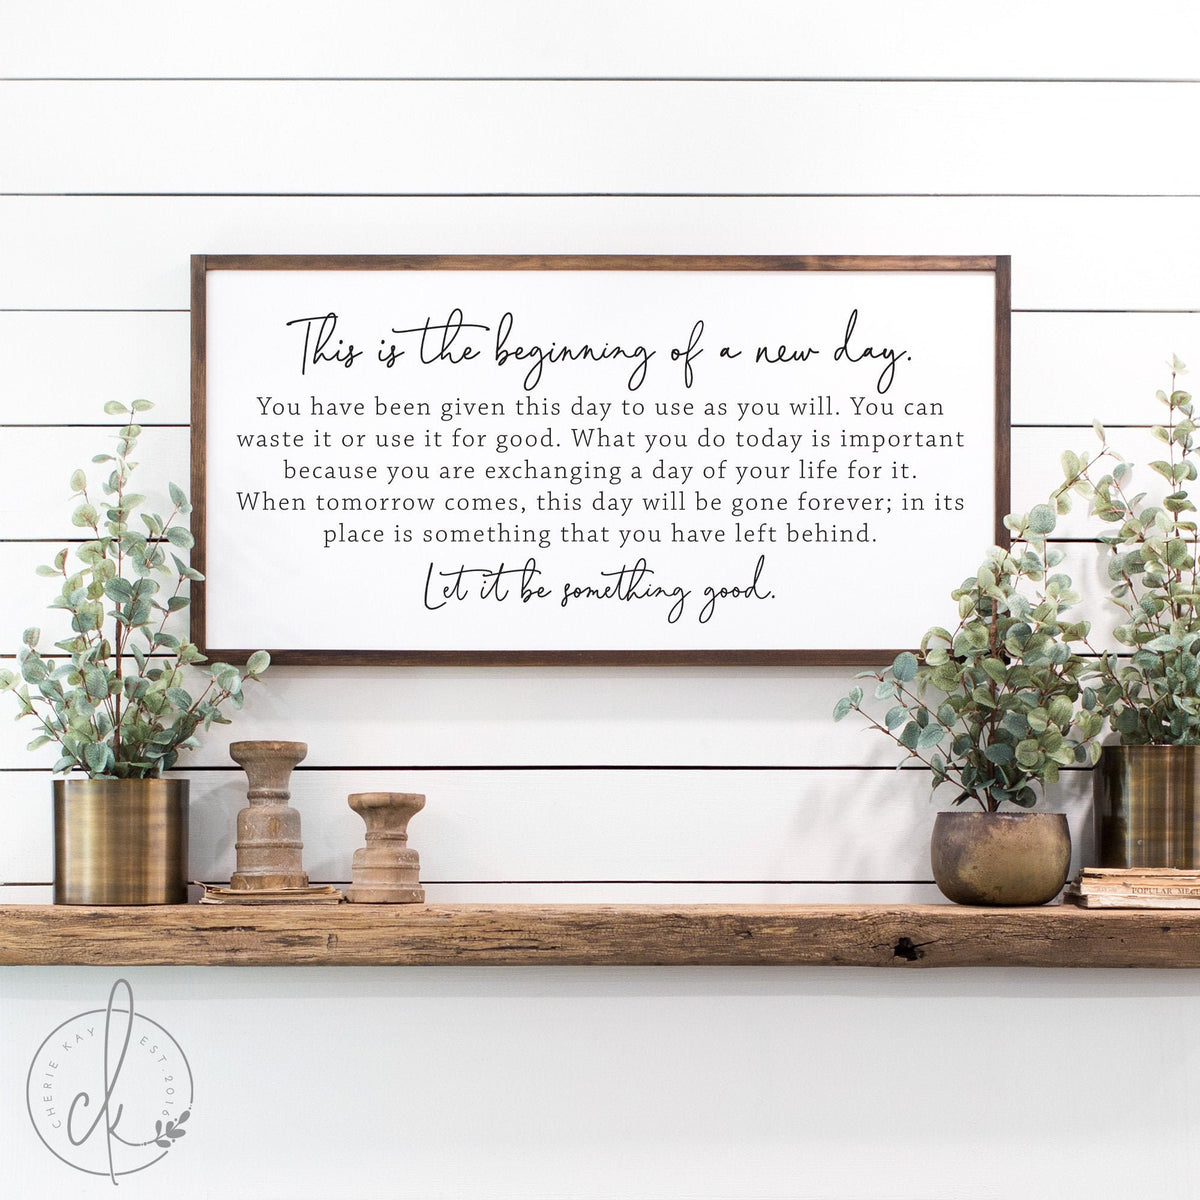 inspirational signs | This is the beginning of a new day sign | home decor sign | office wall decor | motivational signs | office signs